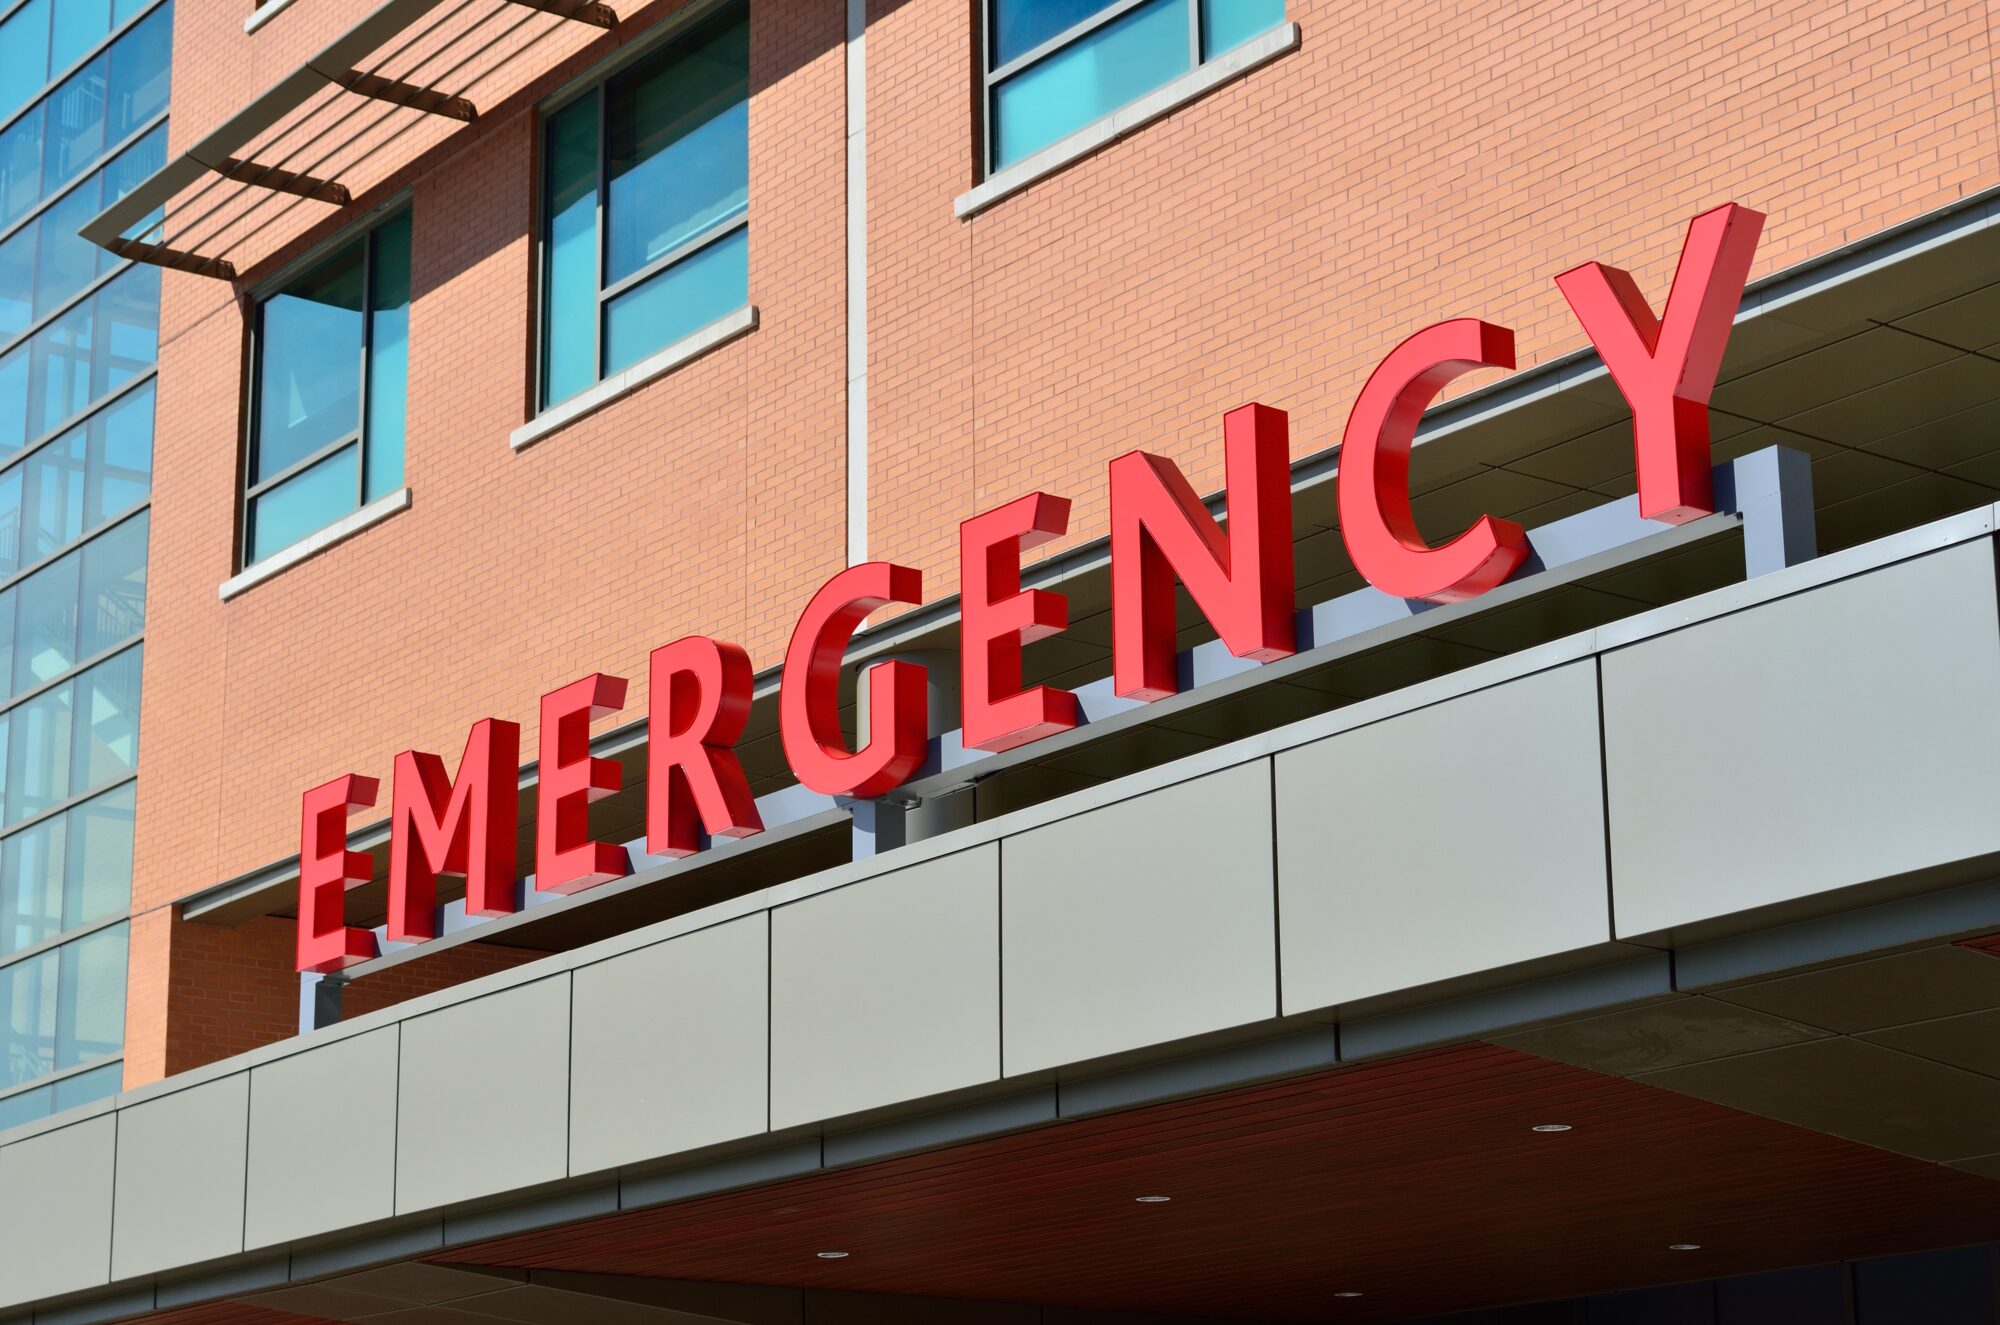 Large red "emergency" sign on the facade of a hospital building with a modern brick exterior and several windows, meeting product liability standards.